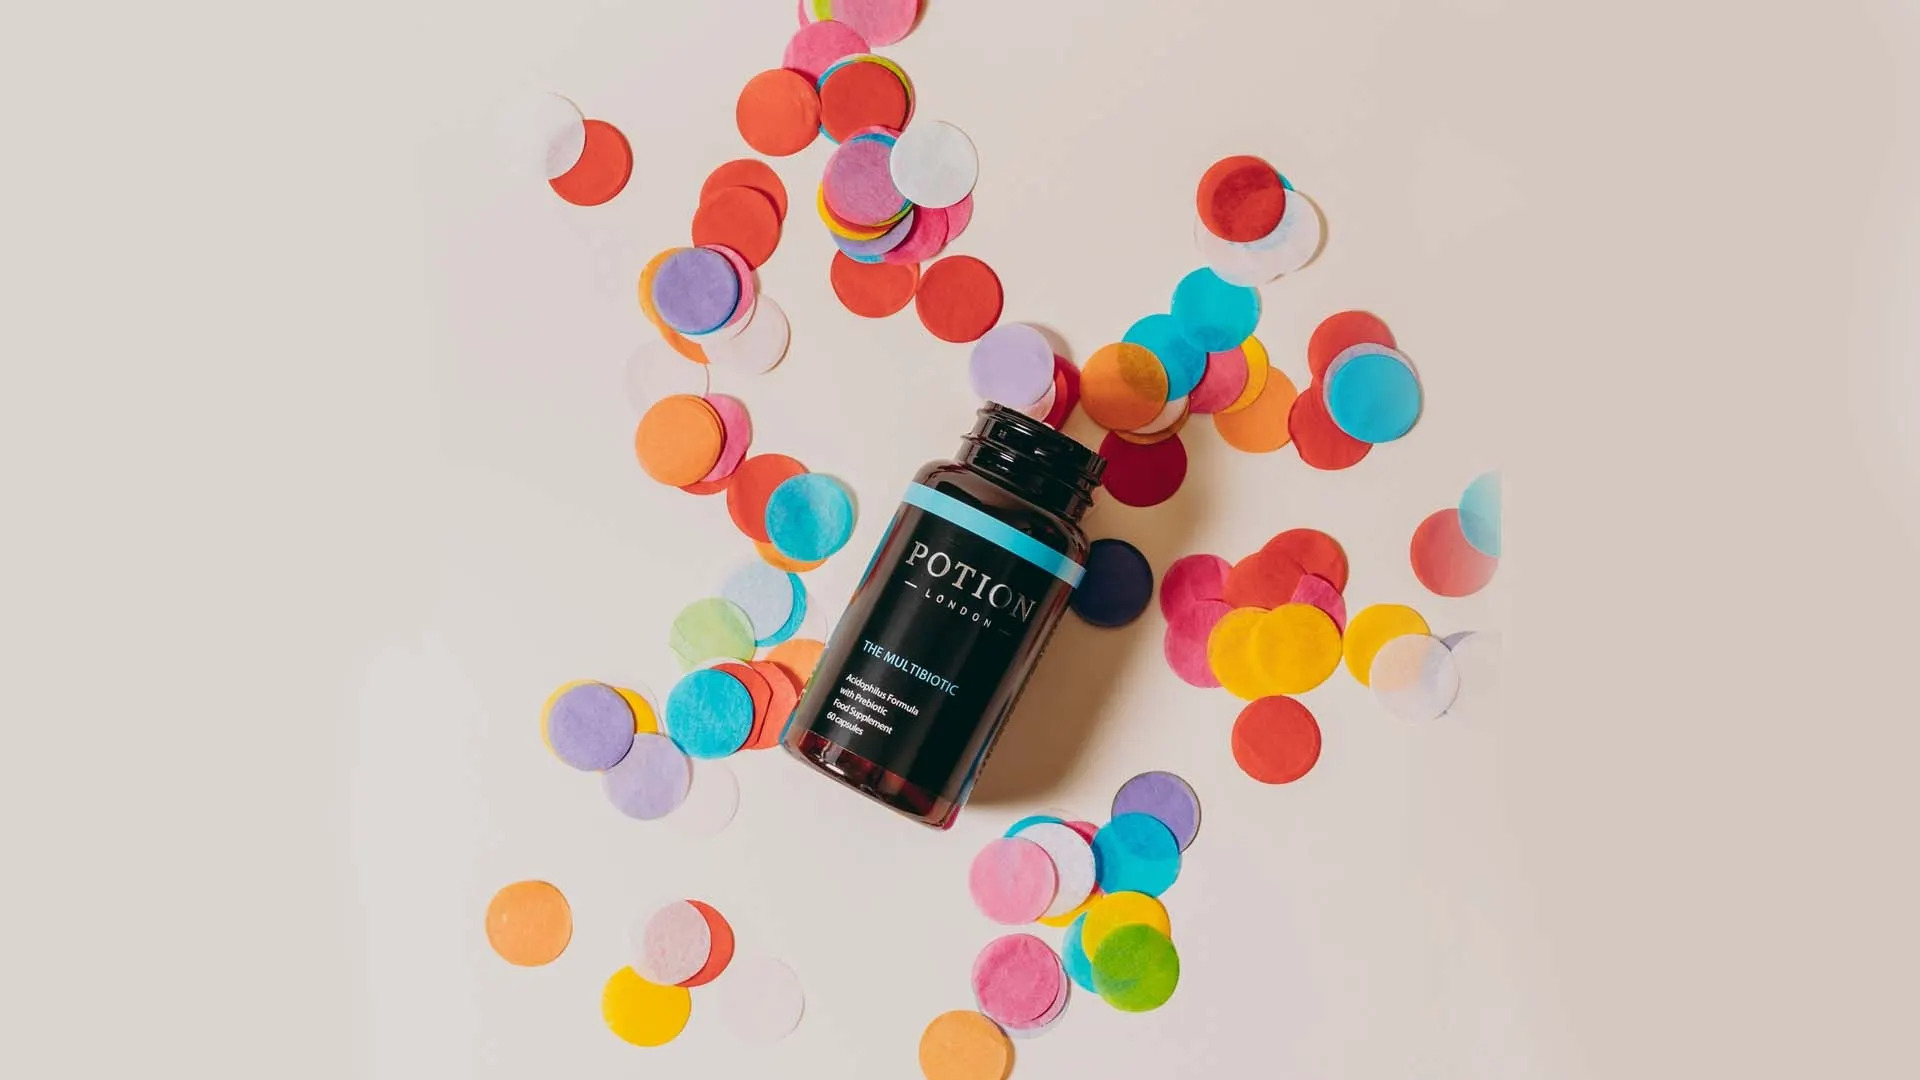 A bottle of Potion London's multibiotic supplement surrounded by confetti